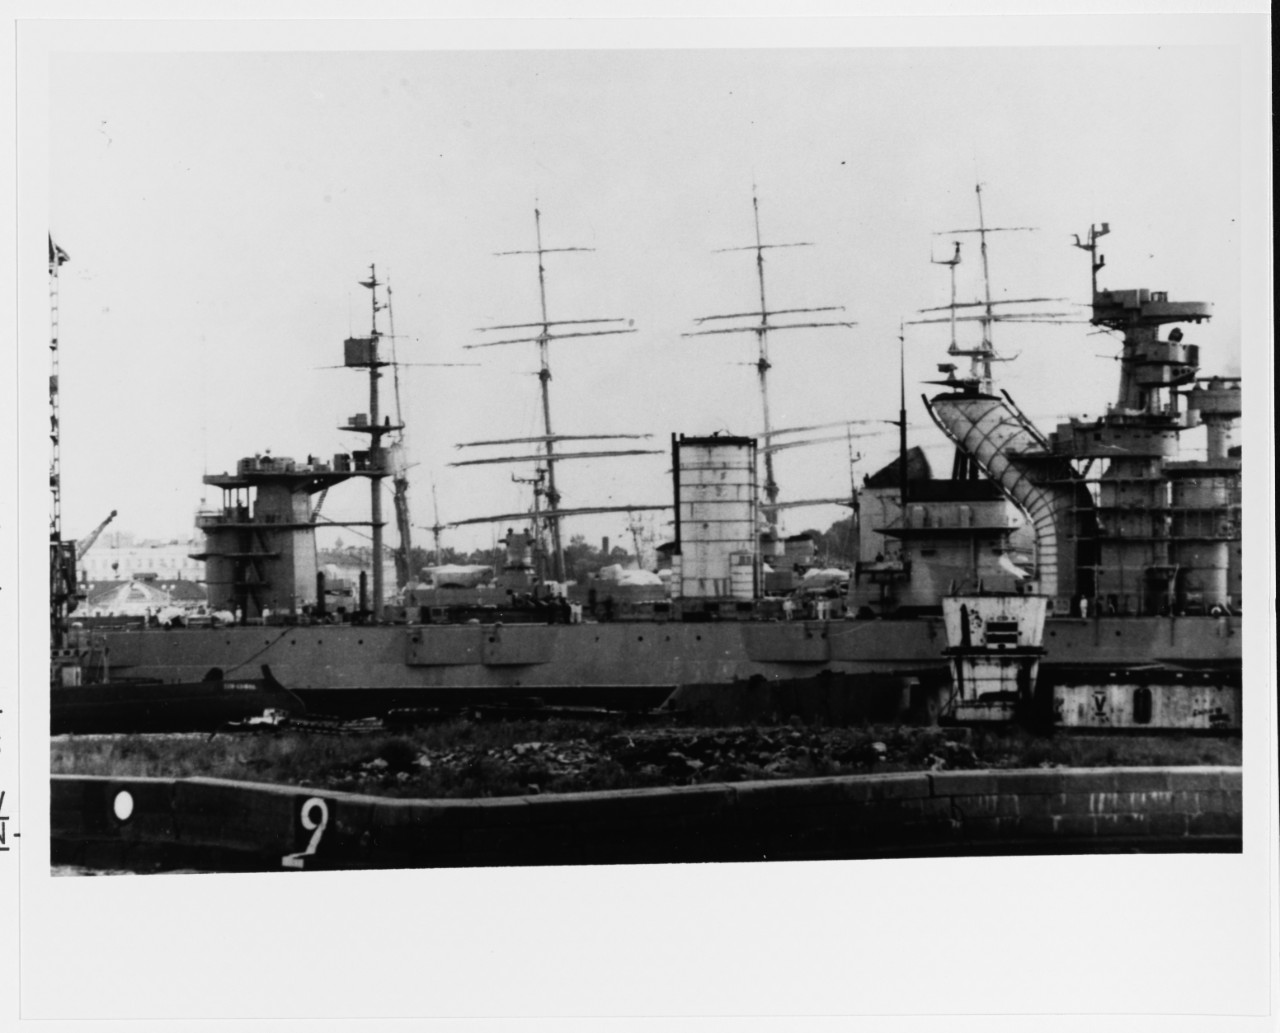 Partial view of Soviet warships in a Baltic port, 1956